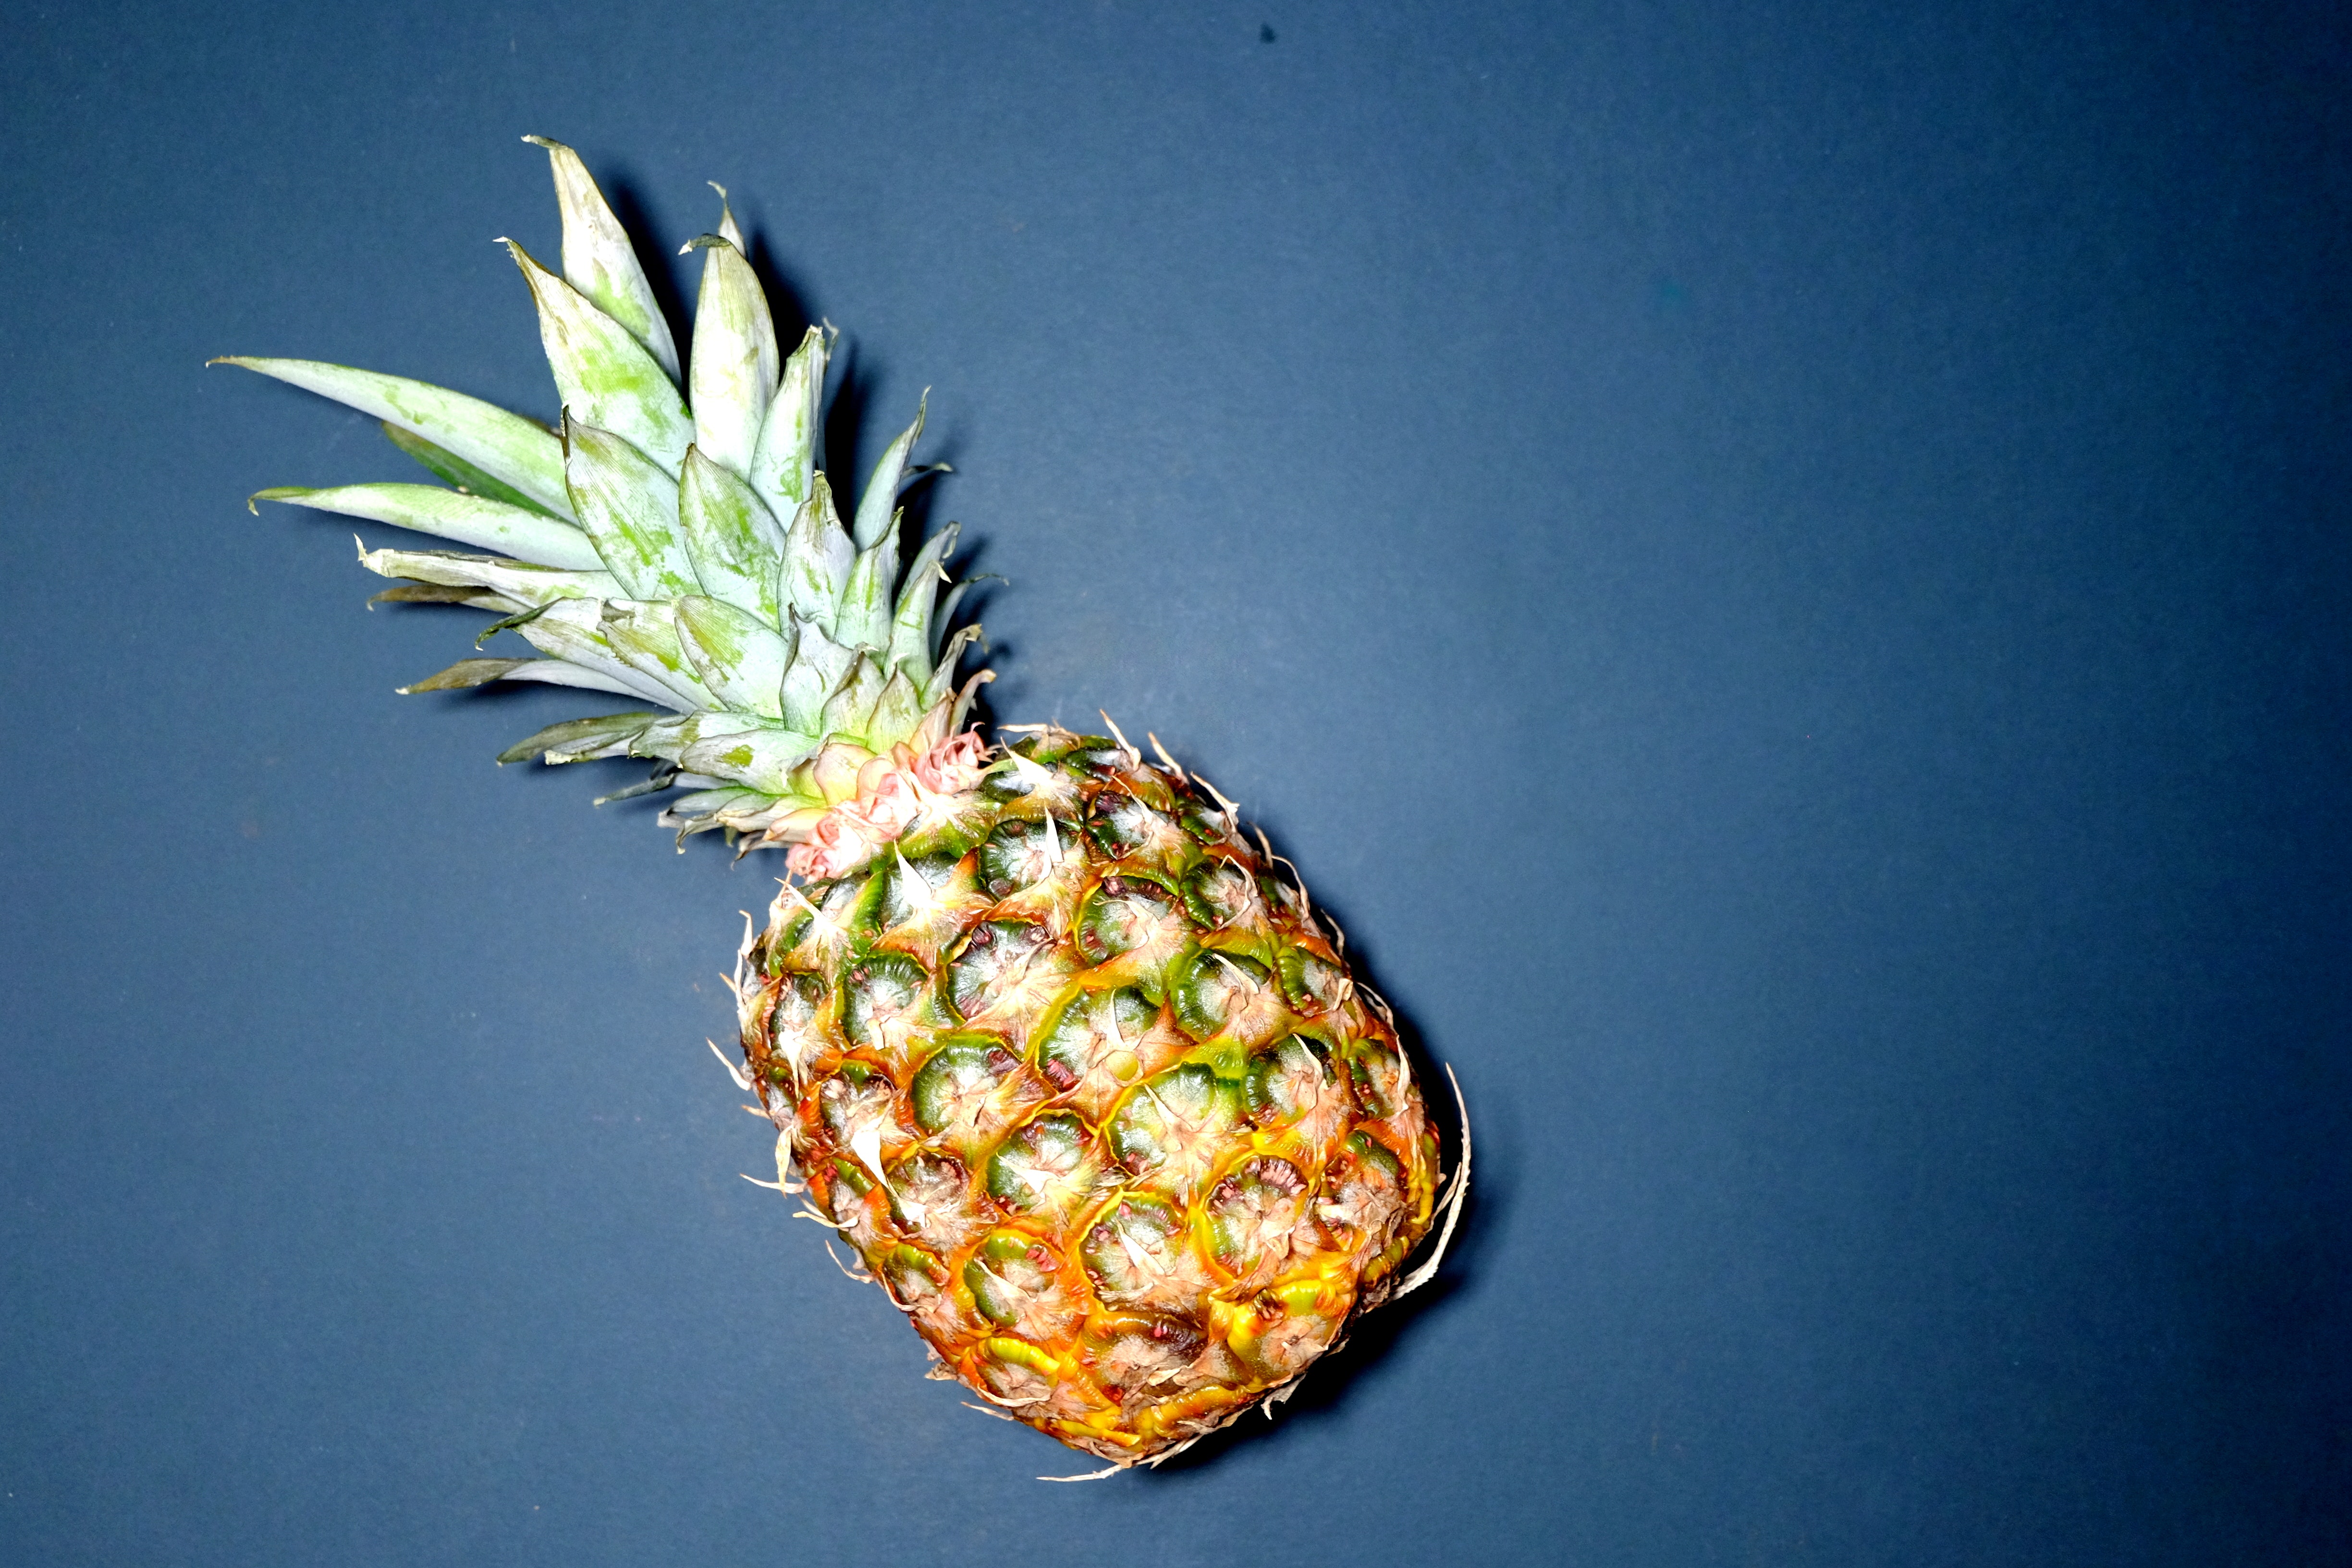 Pineapple on blue surface photo